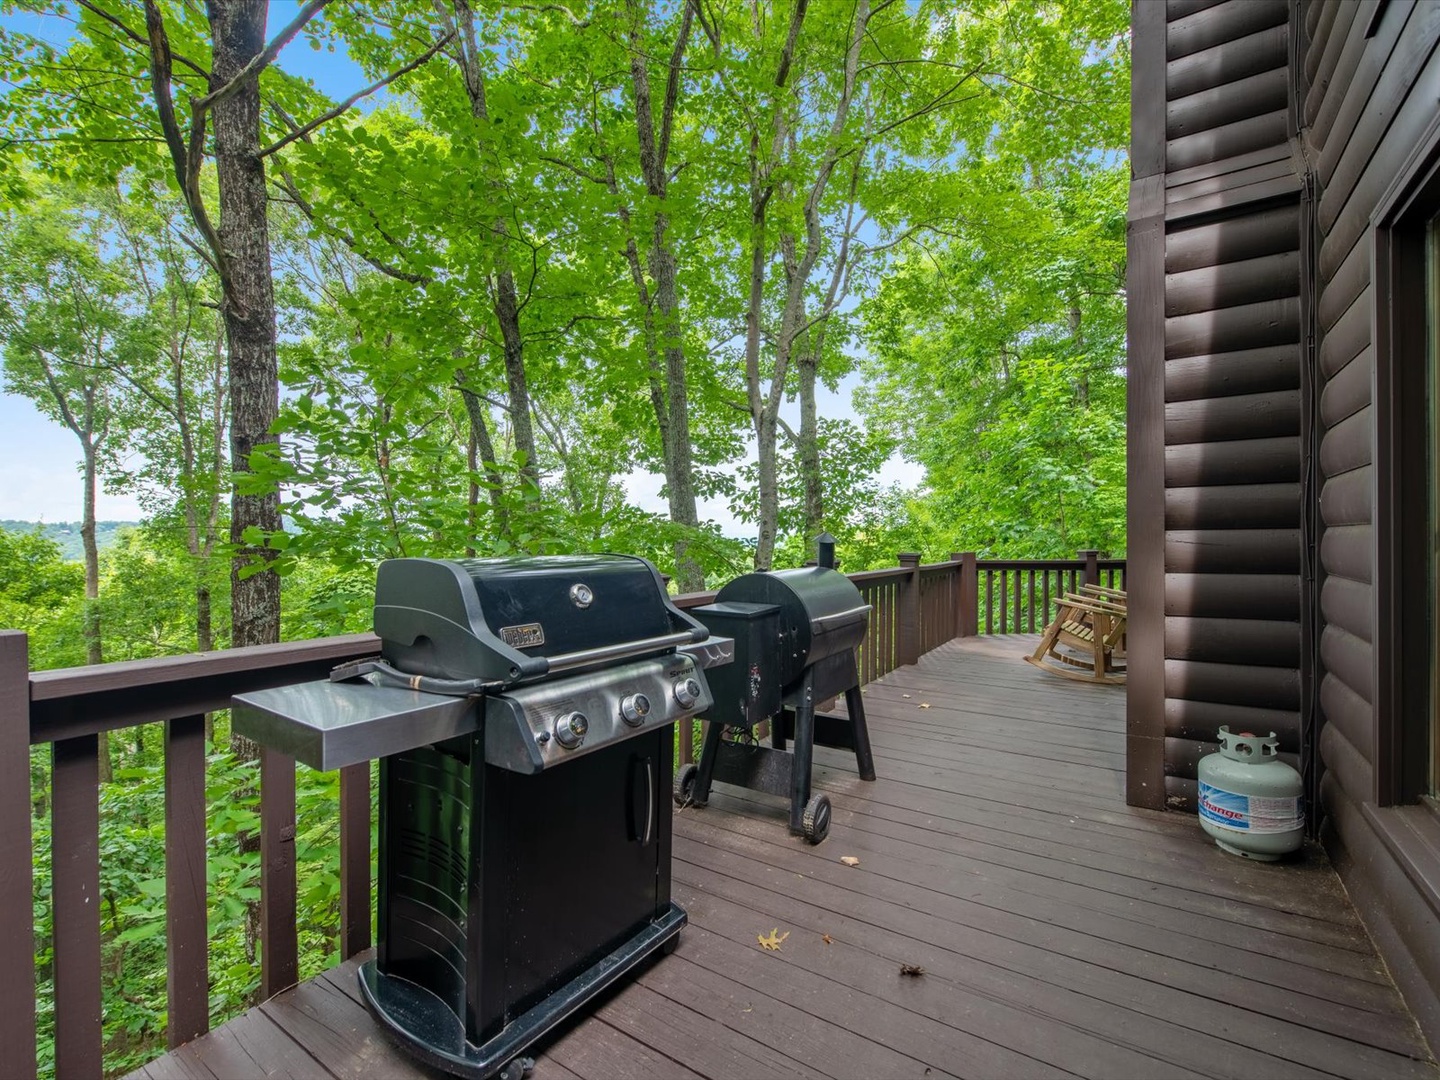 Away from Everyday: Entry Level Deck Grilling Station